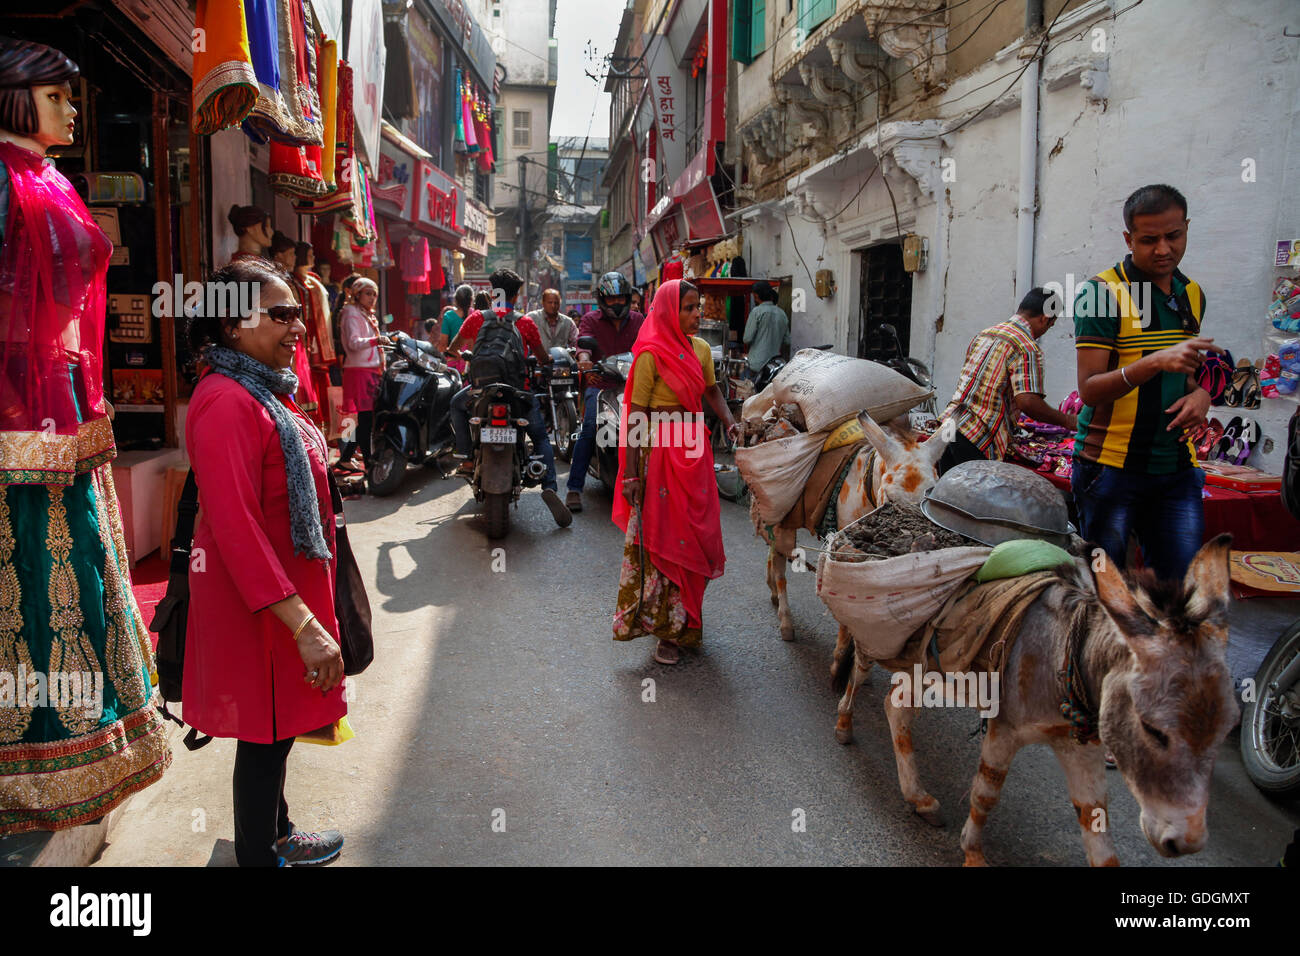 A busy, colourfull street outside New Delhi, Indian Stock Photo